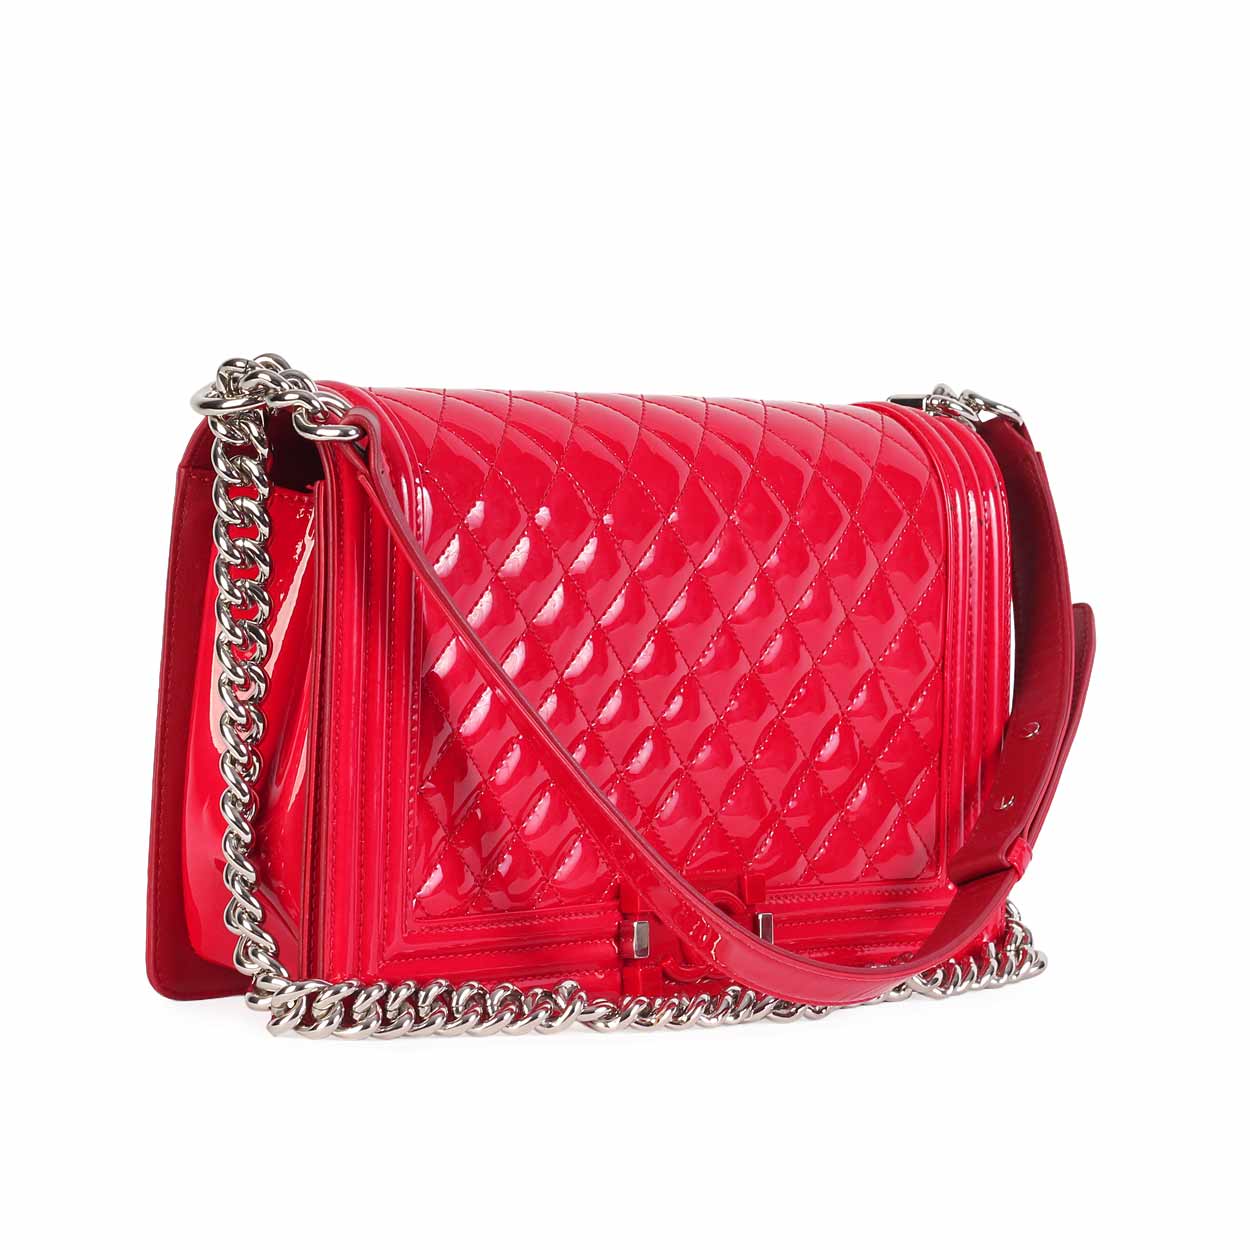 CHANEL New Medium Boy Flap Red Patent Leather - Luxity